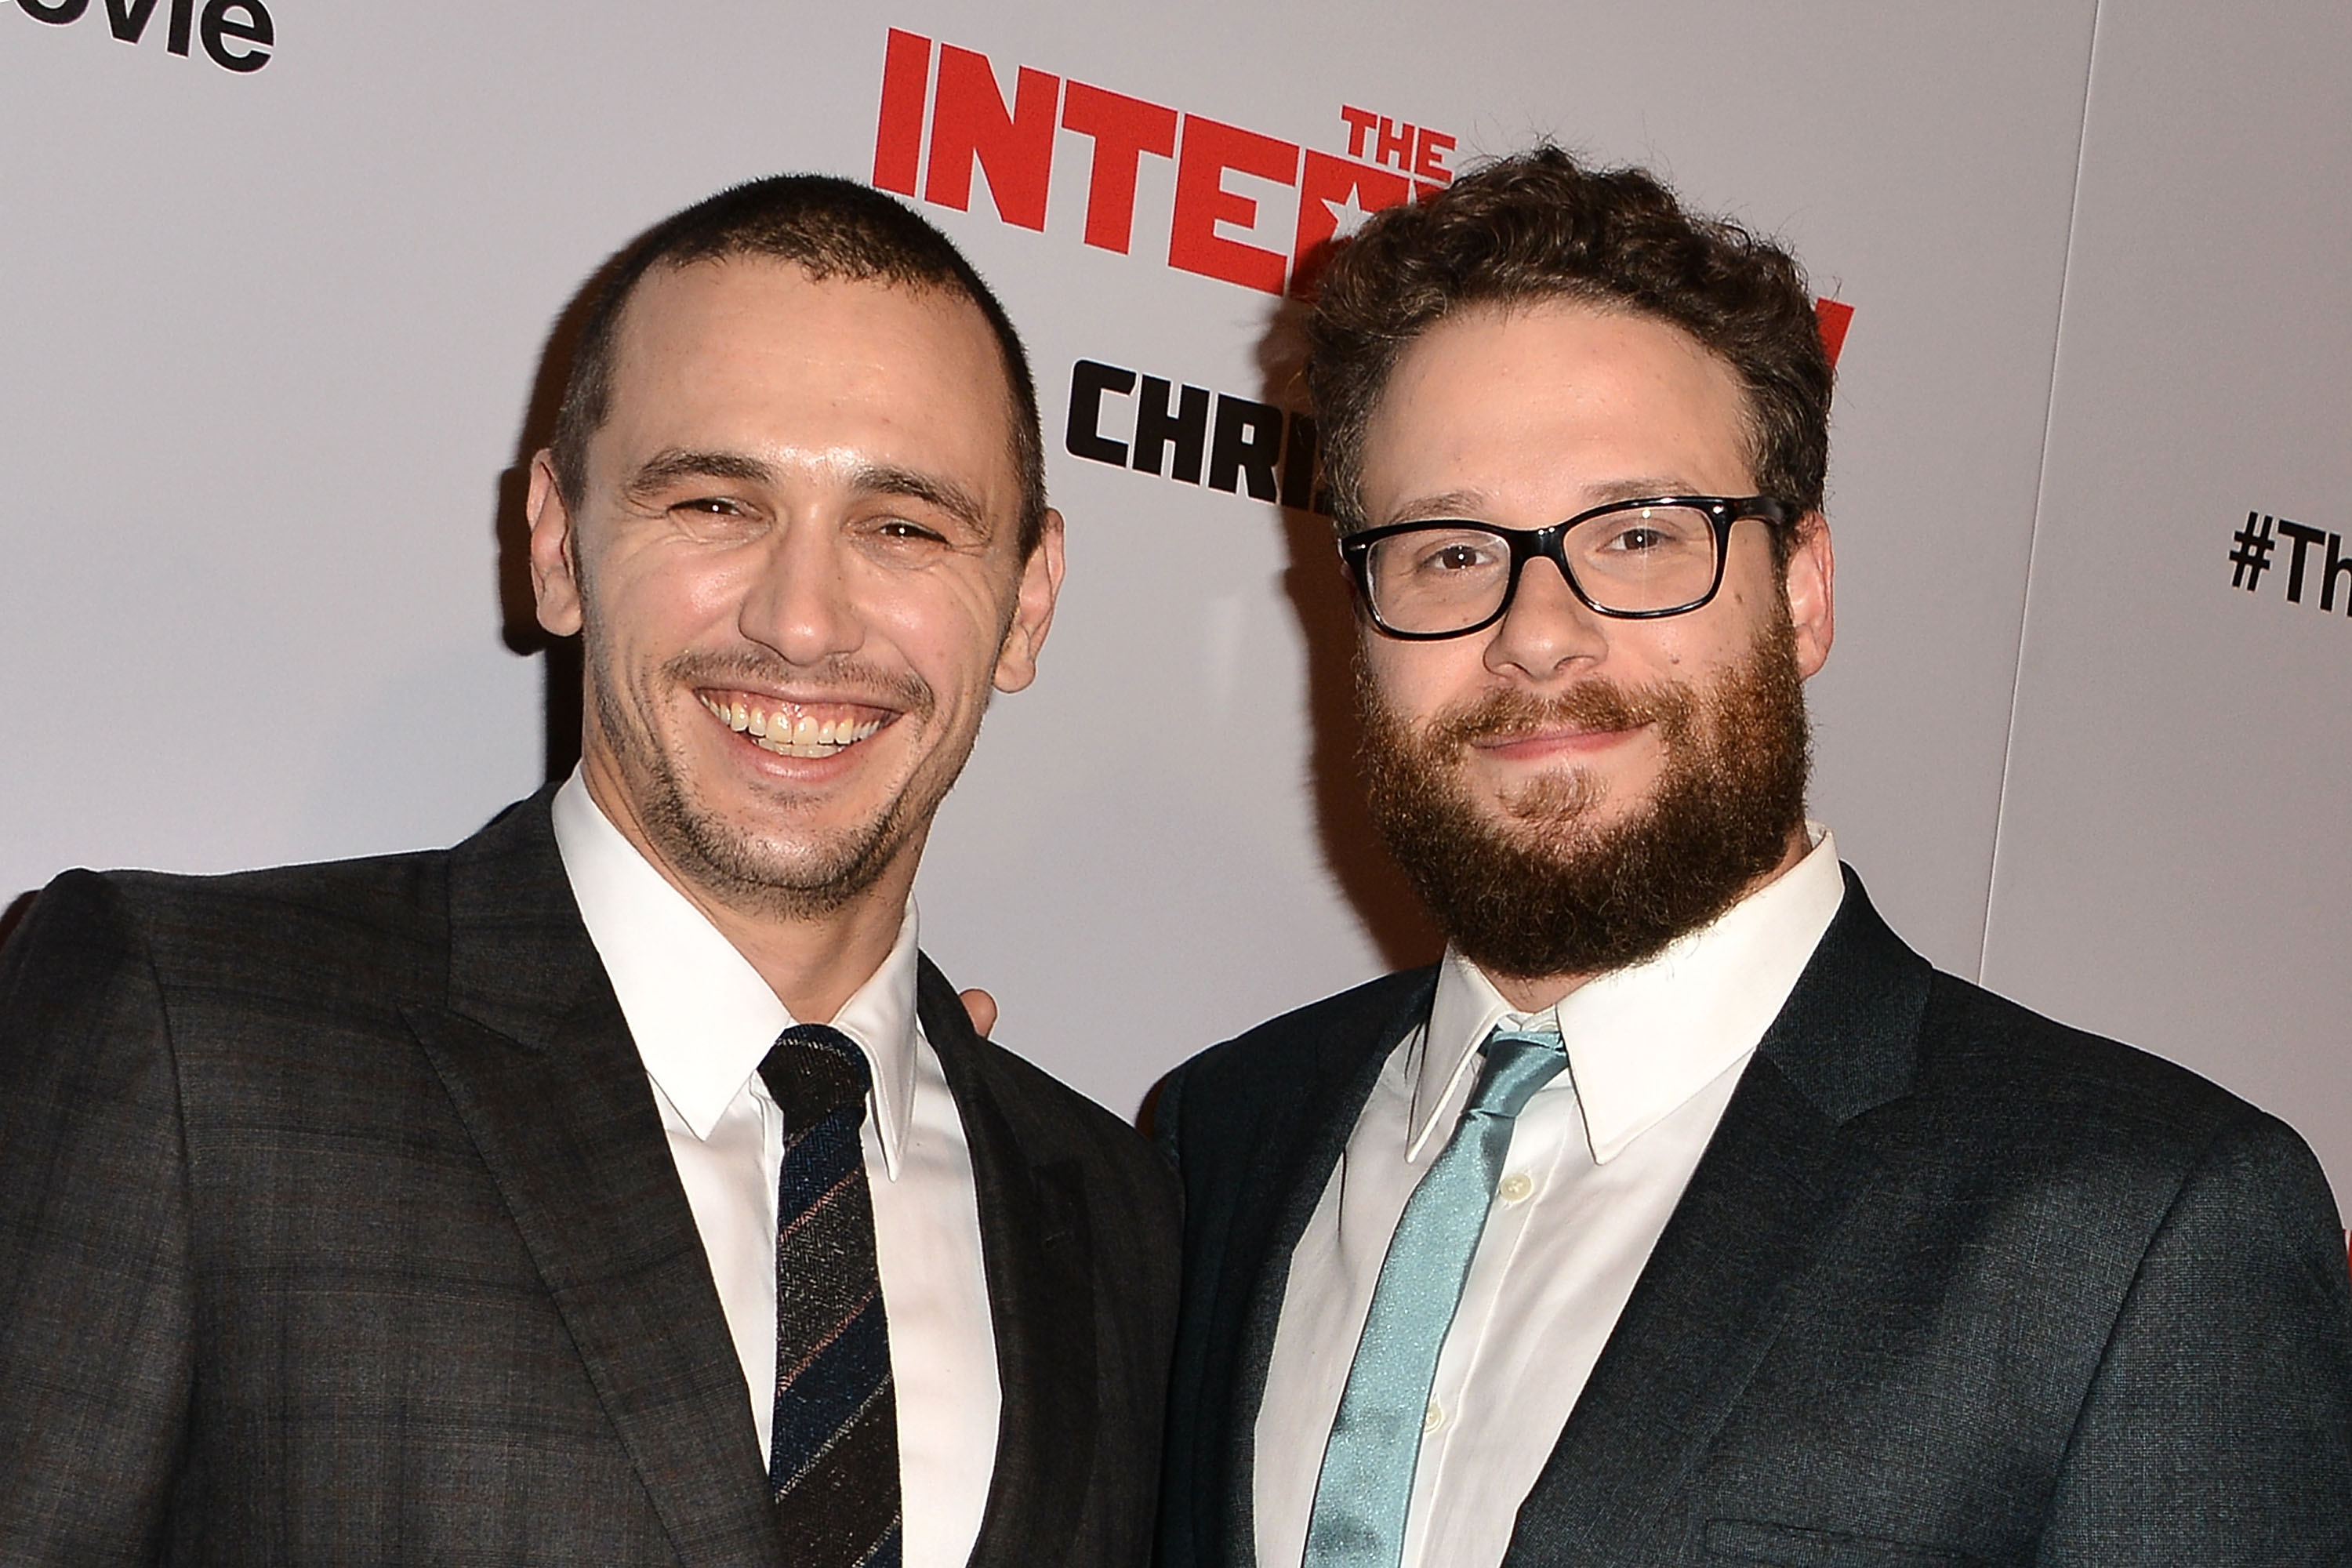 Actors James Franco and Seth Rogen at the Los Angeles premiere of 'The Interview' on Dec. 11, 2014.